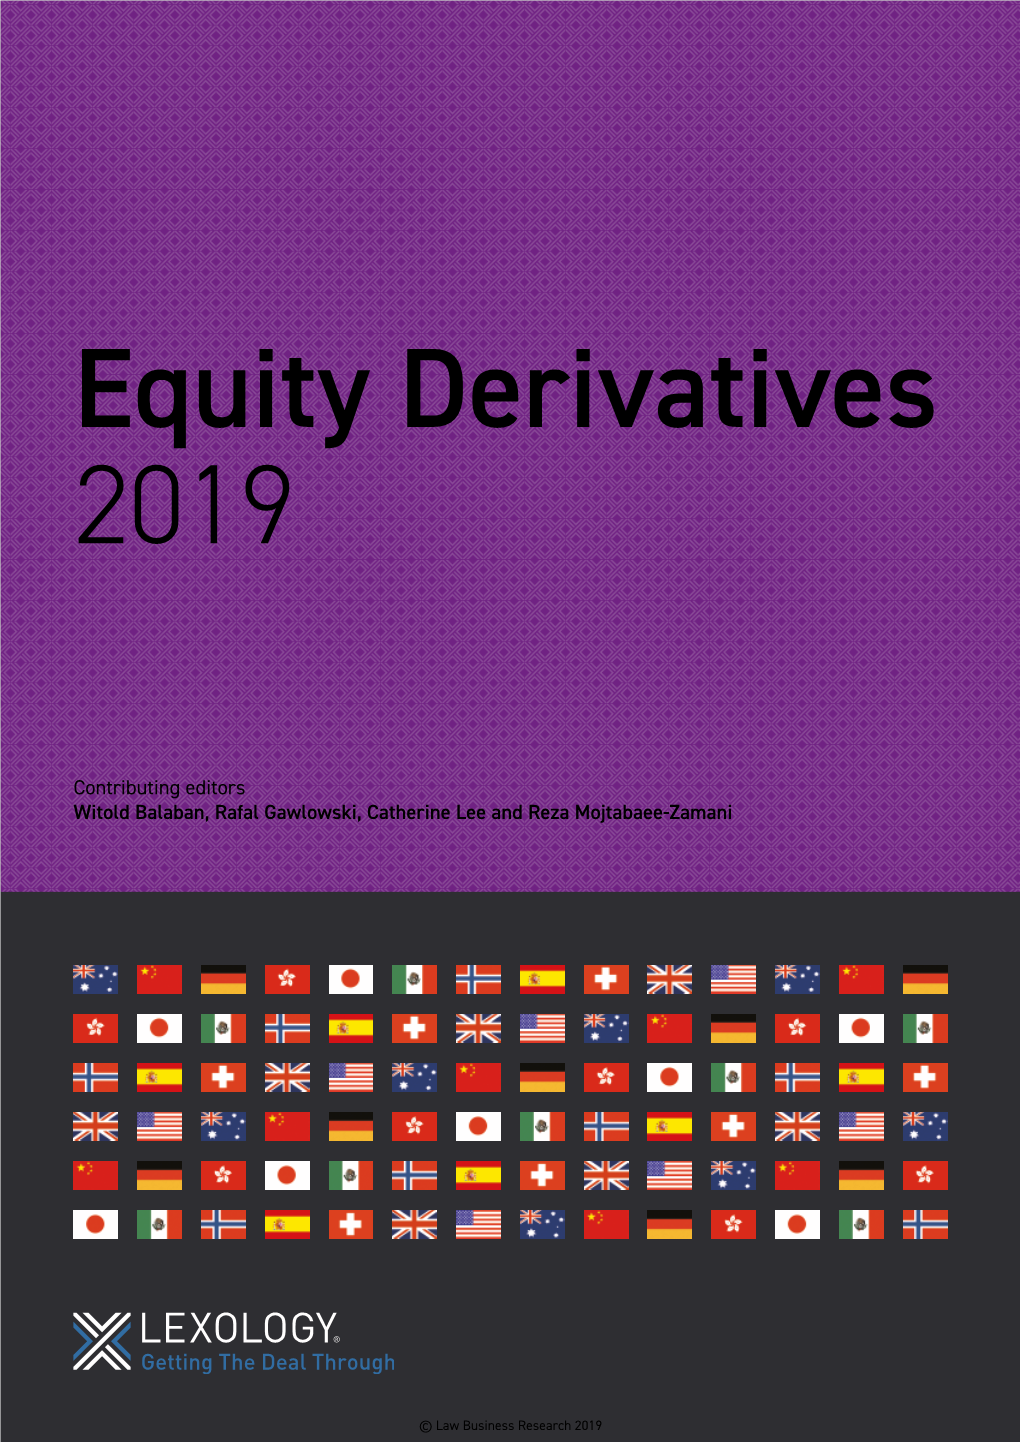 Getting the Deal Through's Equity Derivatives 2019